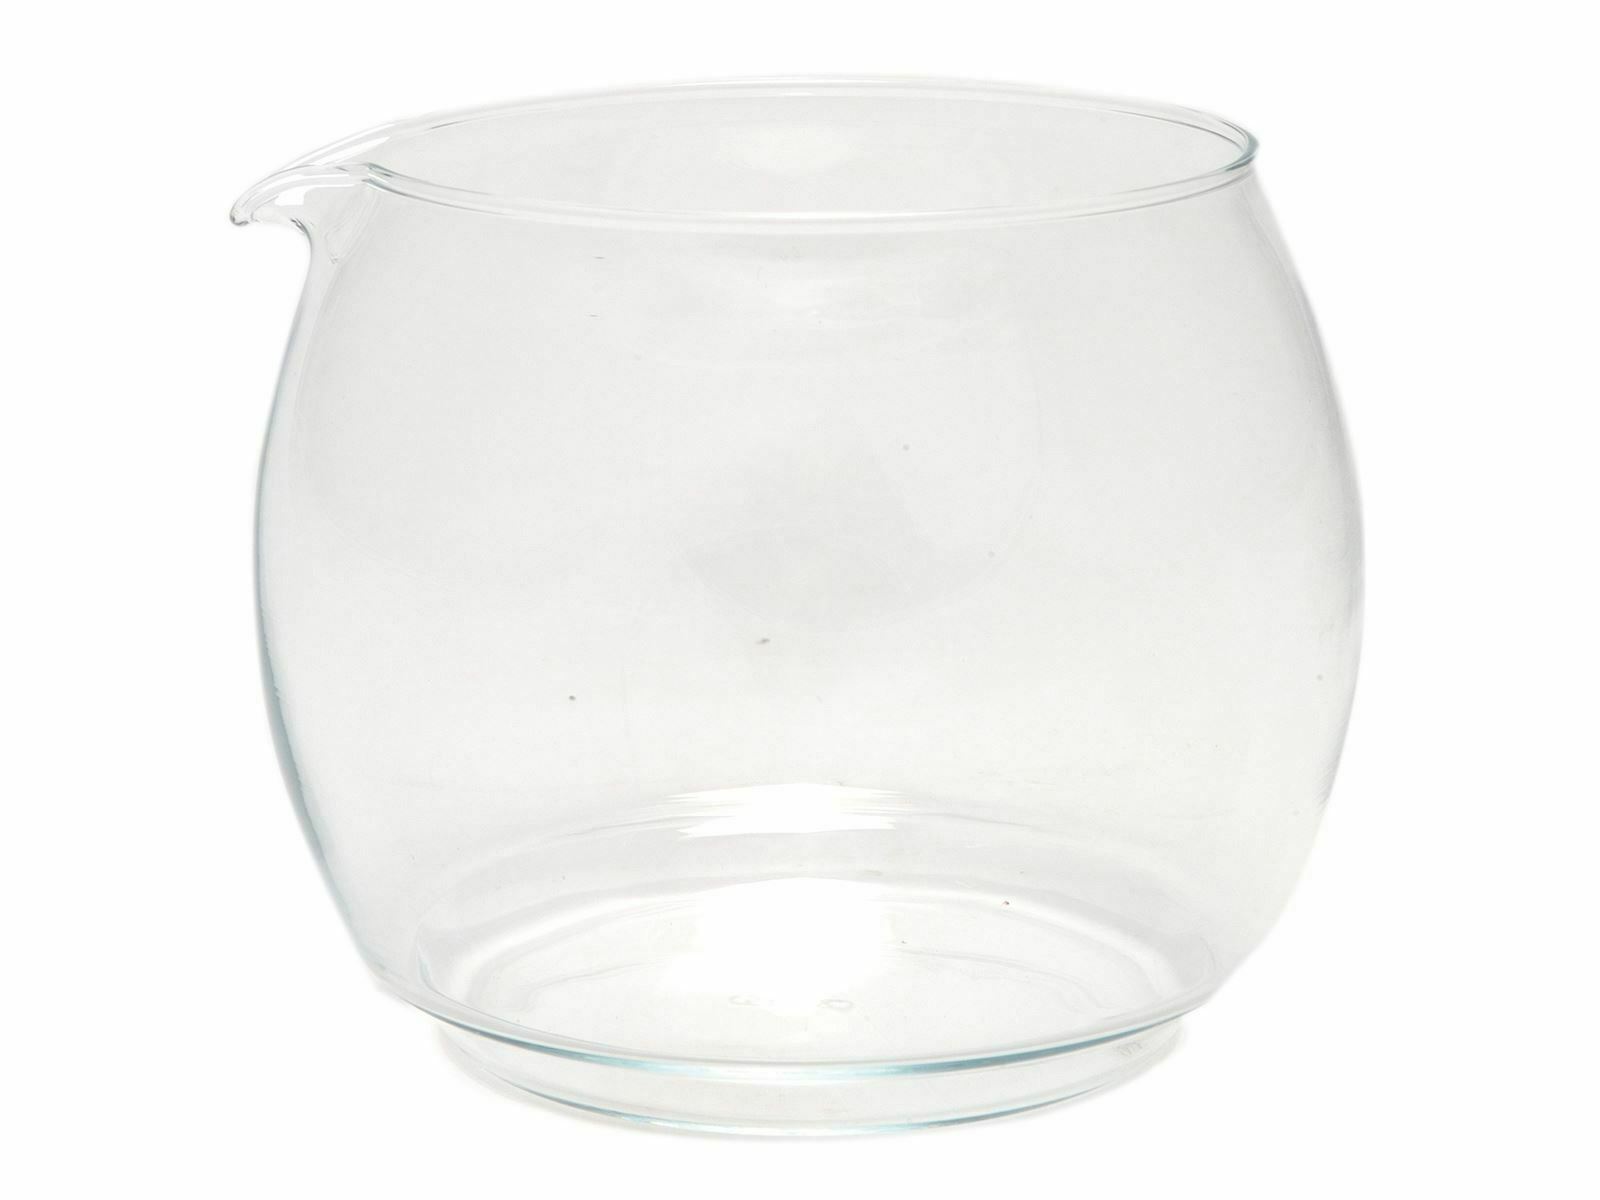 A 660ml Glass beaker. Replacement for La Cafetiere Stainless Steel Teapot